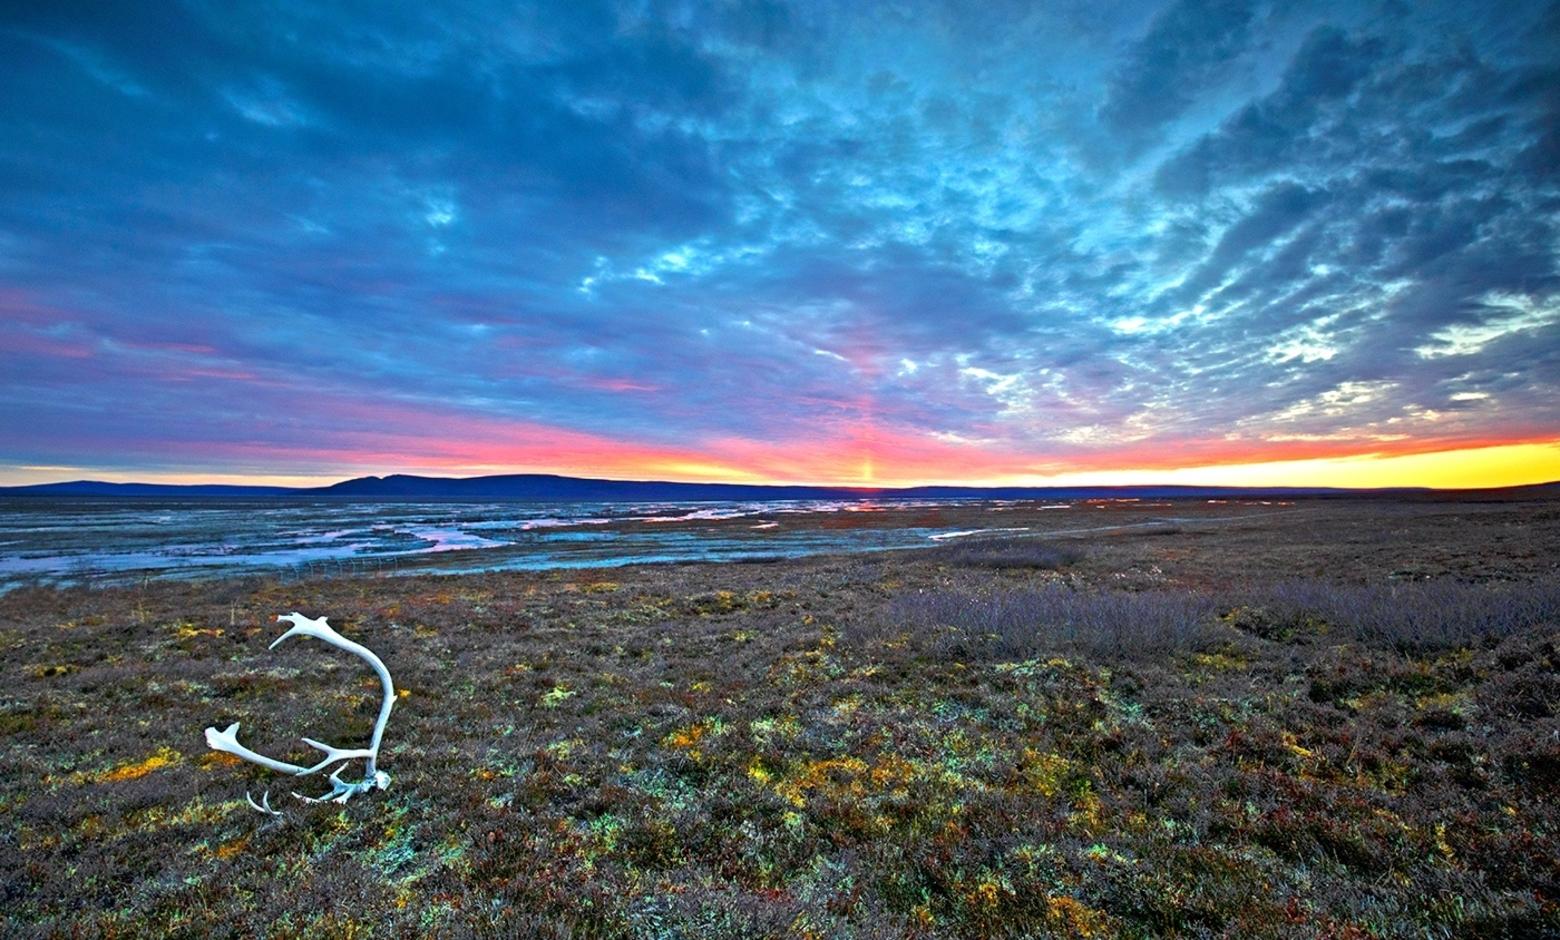 The Arctic National Wildlife Refuge in Alaska, homeland to caribou and other species sensitive to climate change, is designated as a "national wildlife refuge" for a reason. The Trump Administration wants to open it up to energy development, with the burning of fossil fuels extracted from it, ironically certain to hasten the tundra's demise and bring rising seas inundating native communities.  Clayton's photographs are his testaments to the value of wild places most Americans will never see but are part of their own common natural heritage.  Imagine if a portion of the Arctic Refuge were allowed to resemble the Pinedale Anticline in Greater Yellowstone where the Bureau of Land Management has allowed a gas field to become a sacrifice zone for energy development at the expense of migratory pronghorn, mule deer and sage grouse. Photo courtesy Pat Clayton.